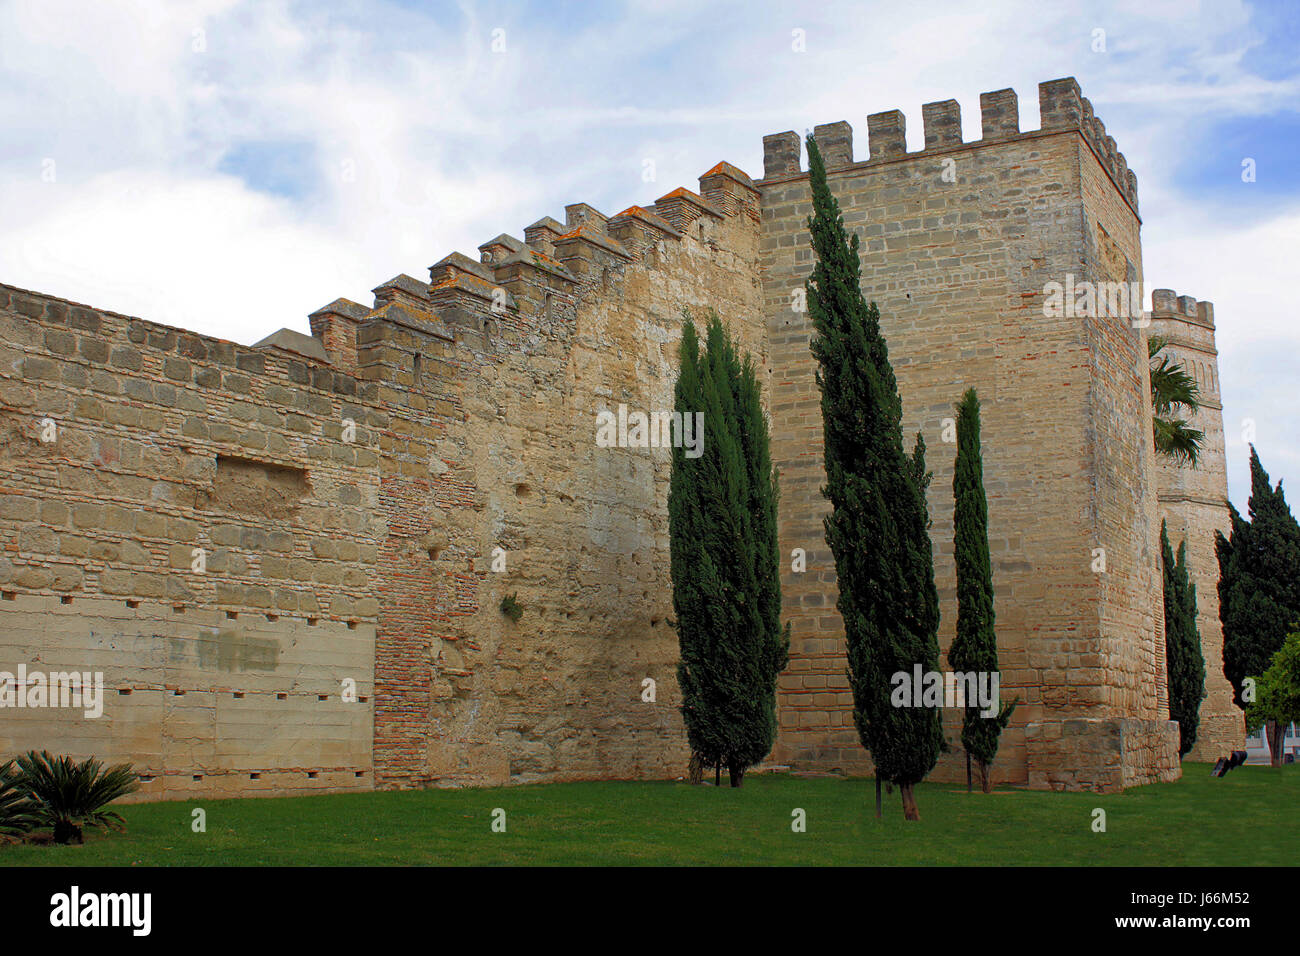 historical andalusia chateau castle middle ages tower historical spain wall Stock Photo